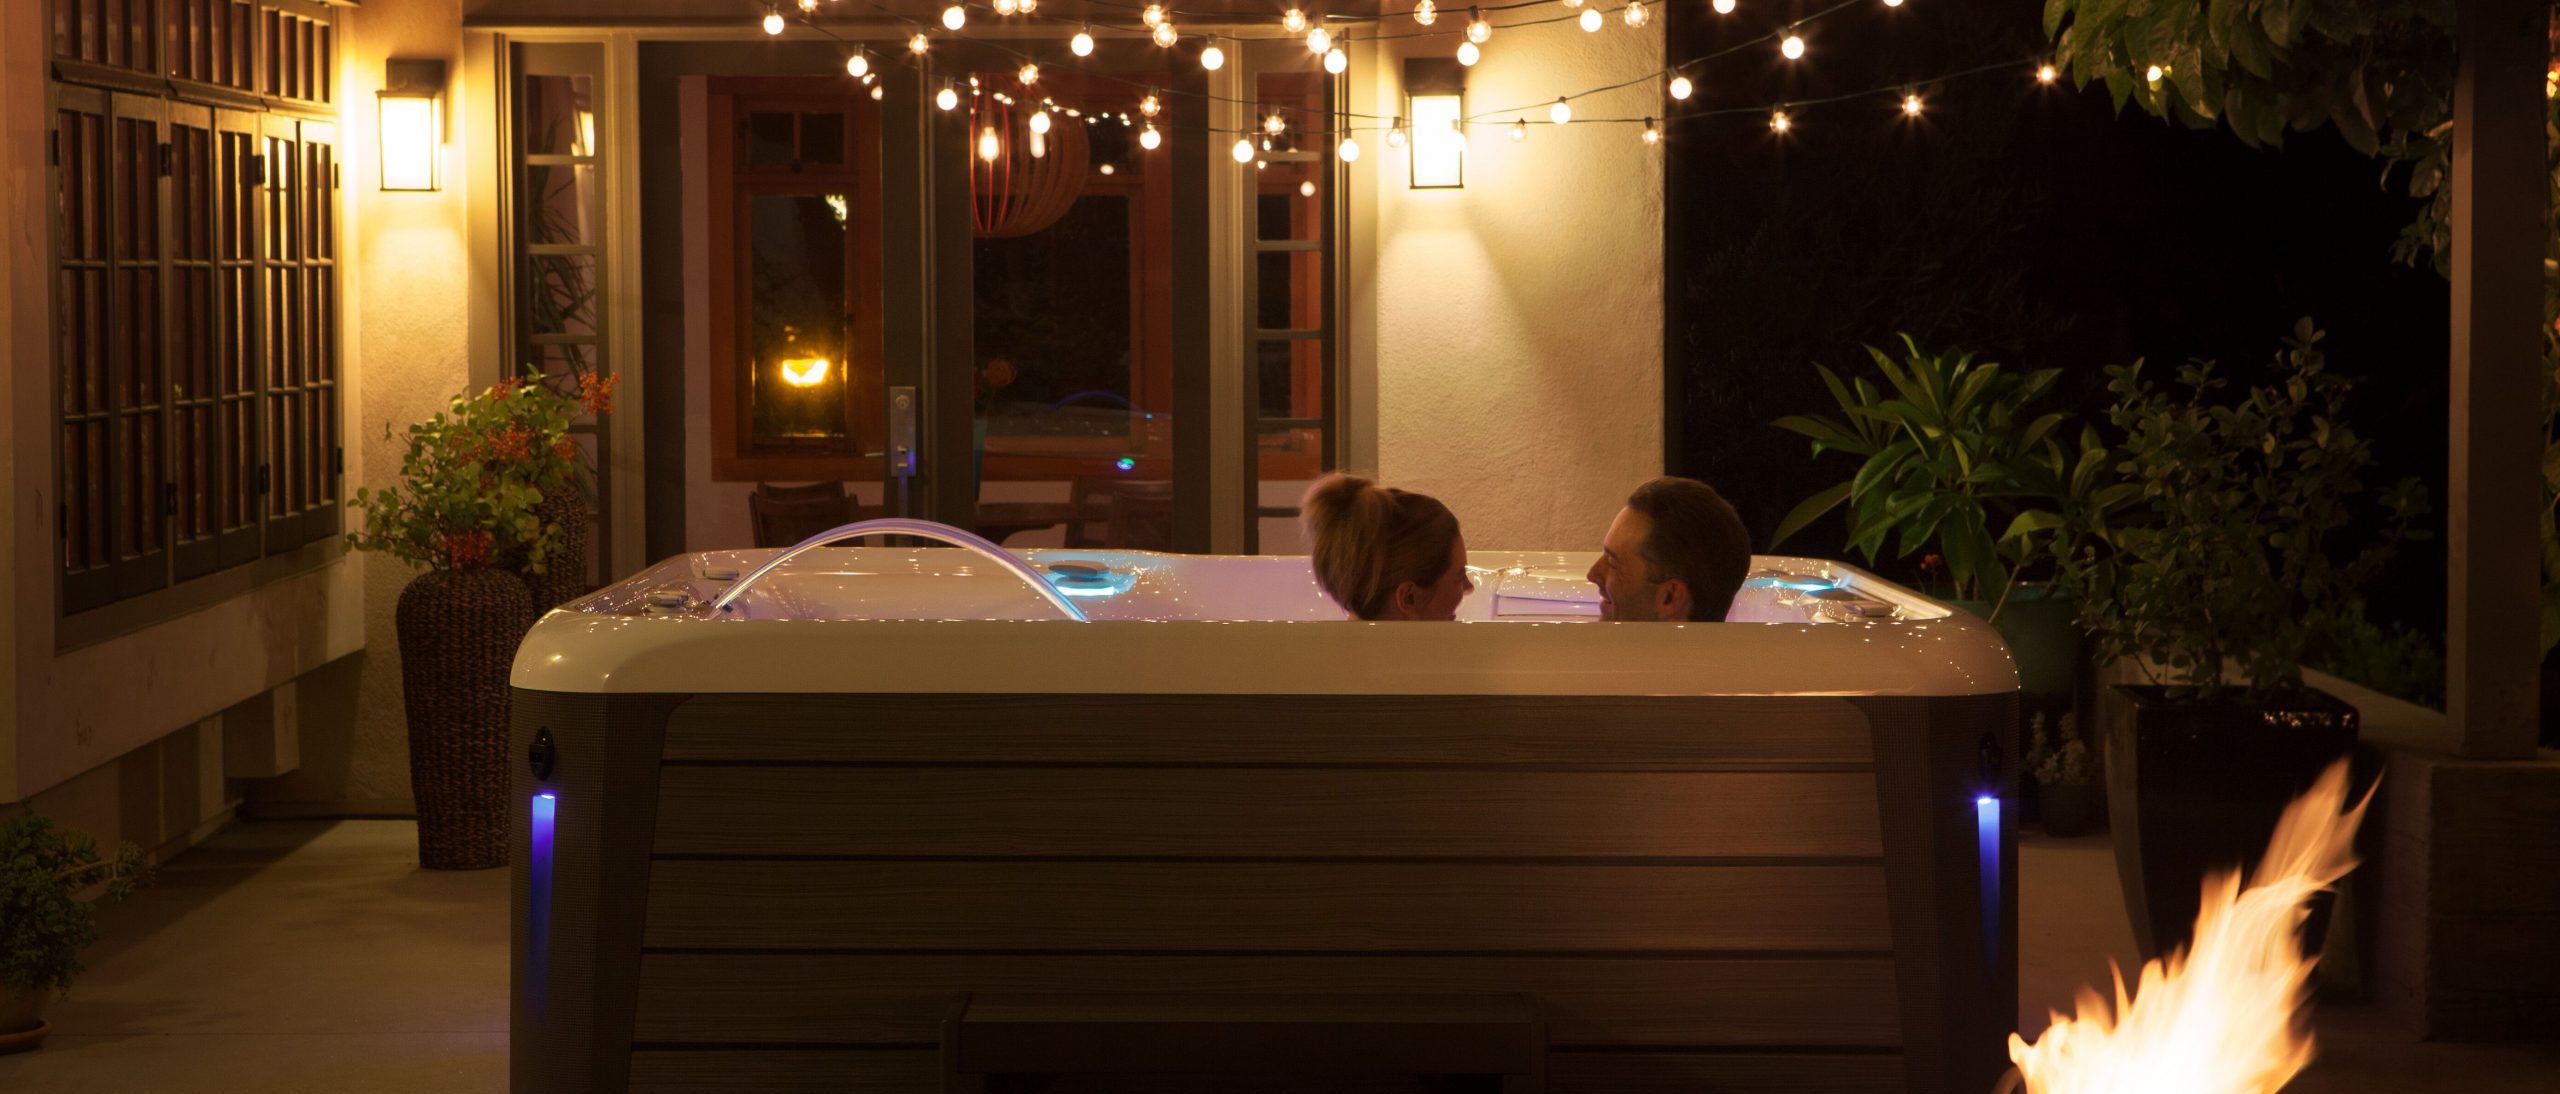 How to Plan a Hot Tub Date Night They’ll NEVER Forget!